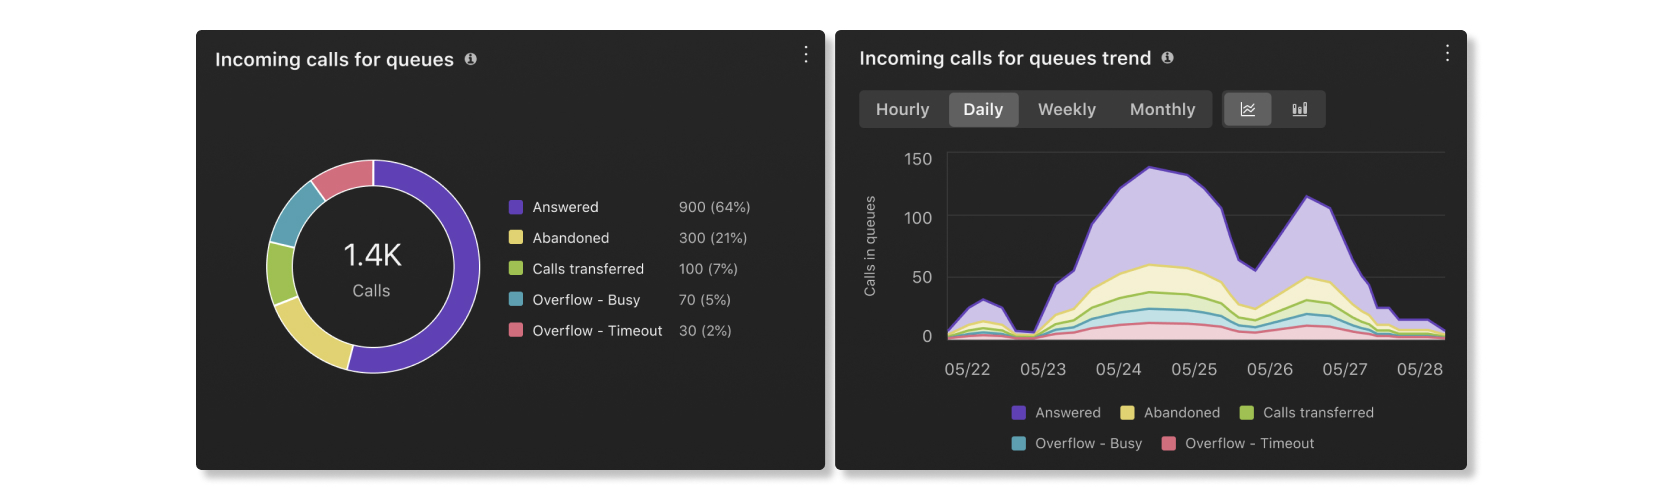 Incoming calls for queues chart in queues historical section of Supervisor desktop in Customer Essentials analytics